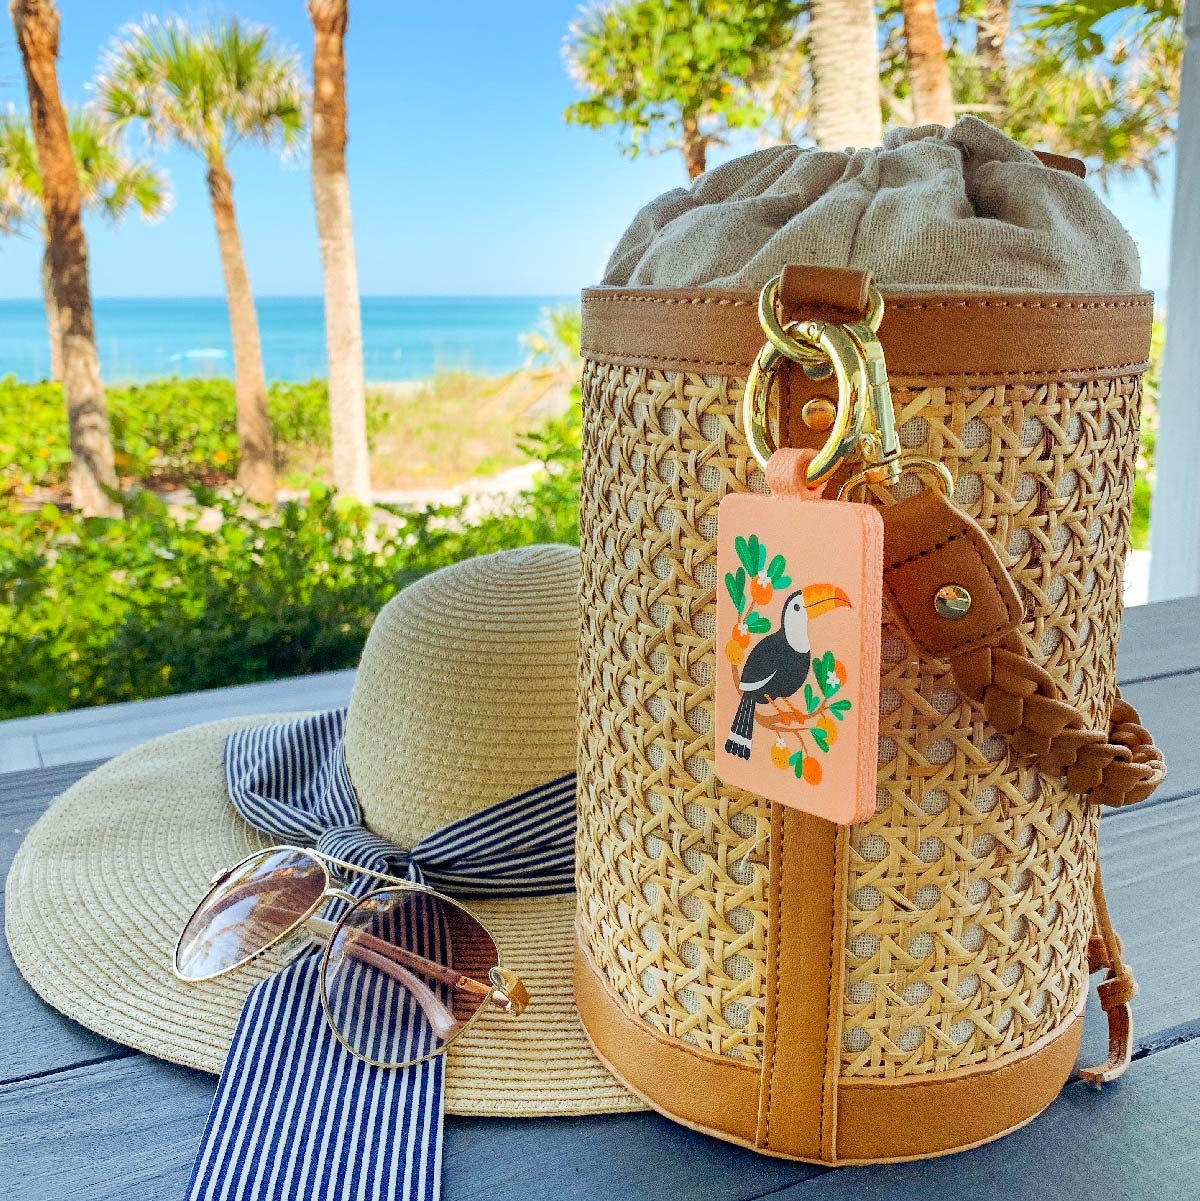 Sammy, the limited-edition Bagnet magnetic purse holder, clipped to a rattan and leather basket bag, sitting on a deck with the blue coastline in the distance